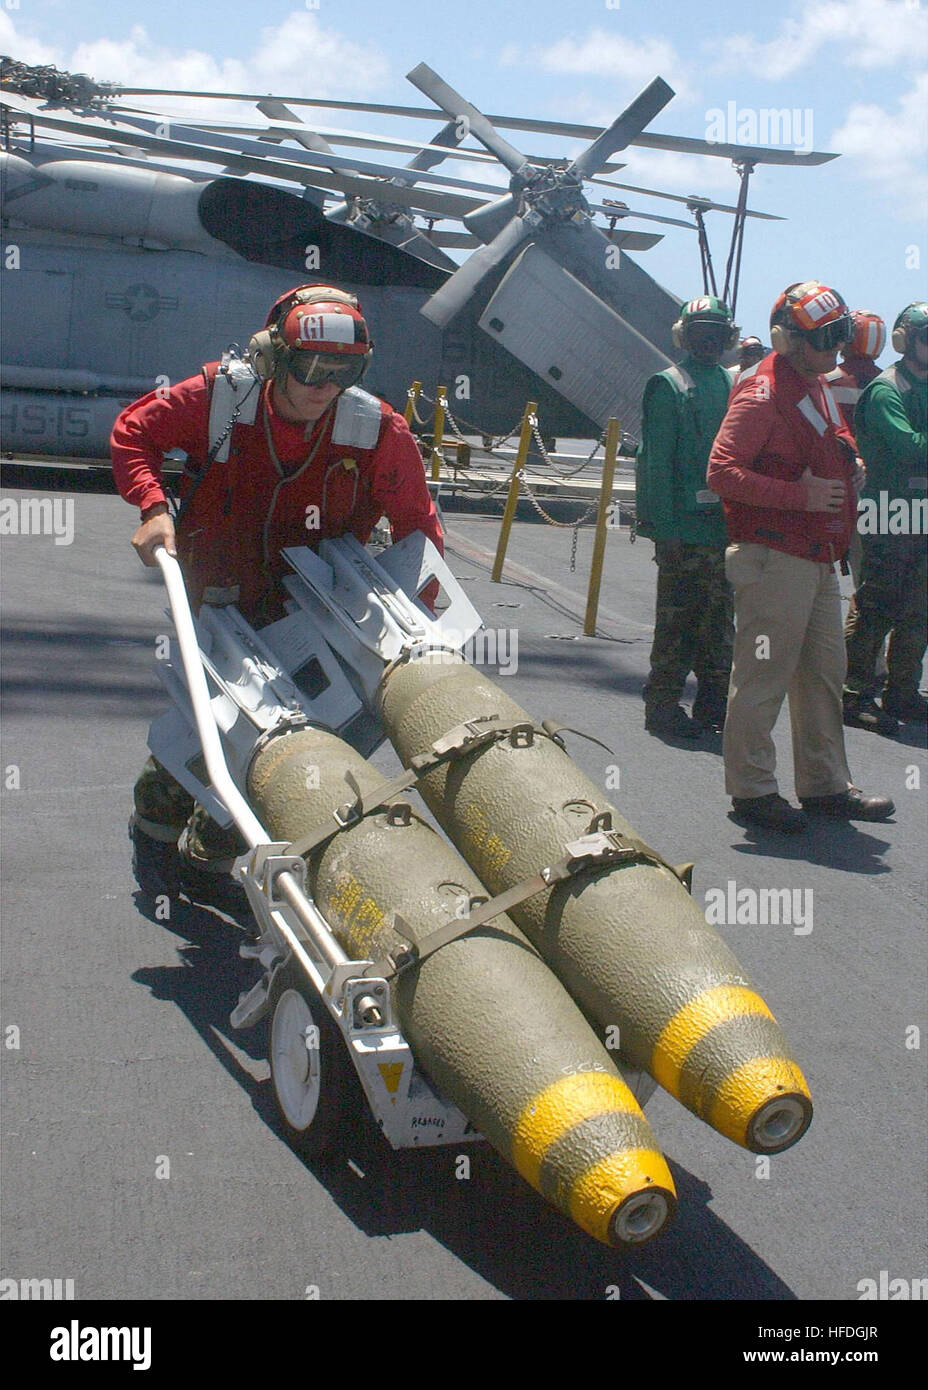 020417-N-4748O-003 At sea aboard USS George Washington (CVN 73) Apr. 17, 2002 -- Aviation Ordnanceman 3rd Class David Morris, of Montgomery, Al, transports 500 pound Mk-82 bombs across the shipÕs flight deck.  Washington is homeported in Norfolk, Va, and is conducting scheduled integrated training exercises in the Atlantic Ocean.  U.S. Navy photo by Photographer's Mate Airman Geanine Ortez.  (RELEASED) US Navy 020417-N-4748O-003 Aviation Ordnanceman David Morris Stock Photo